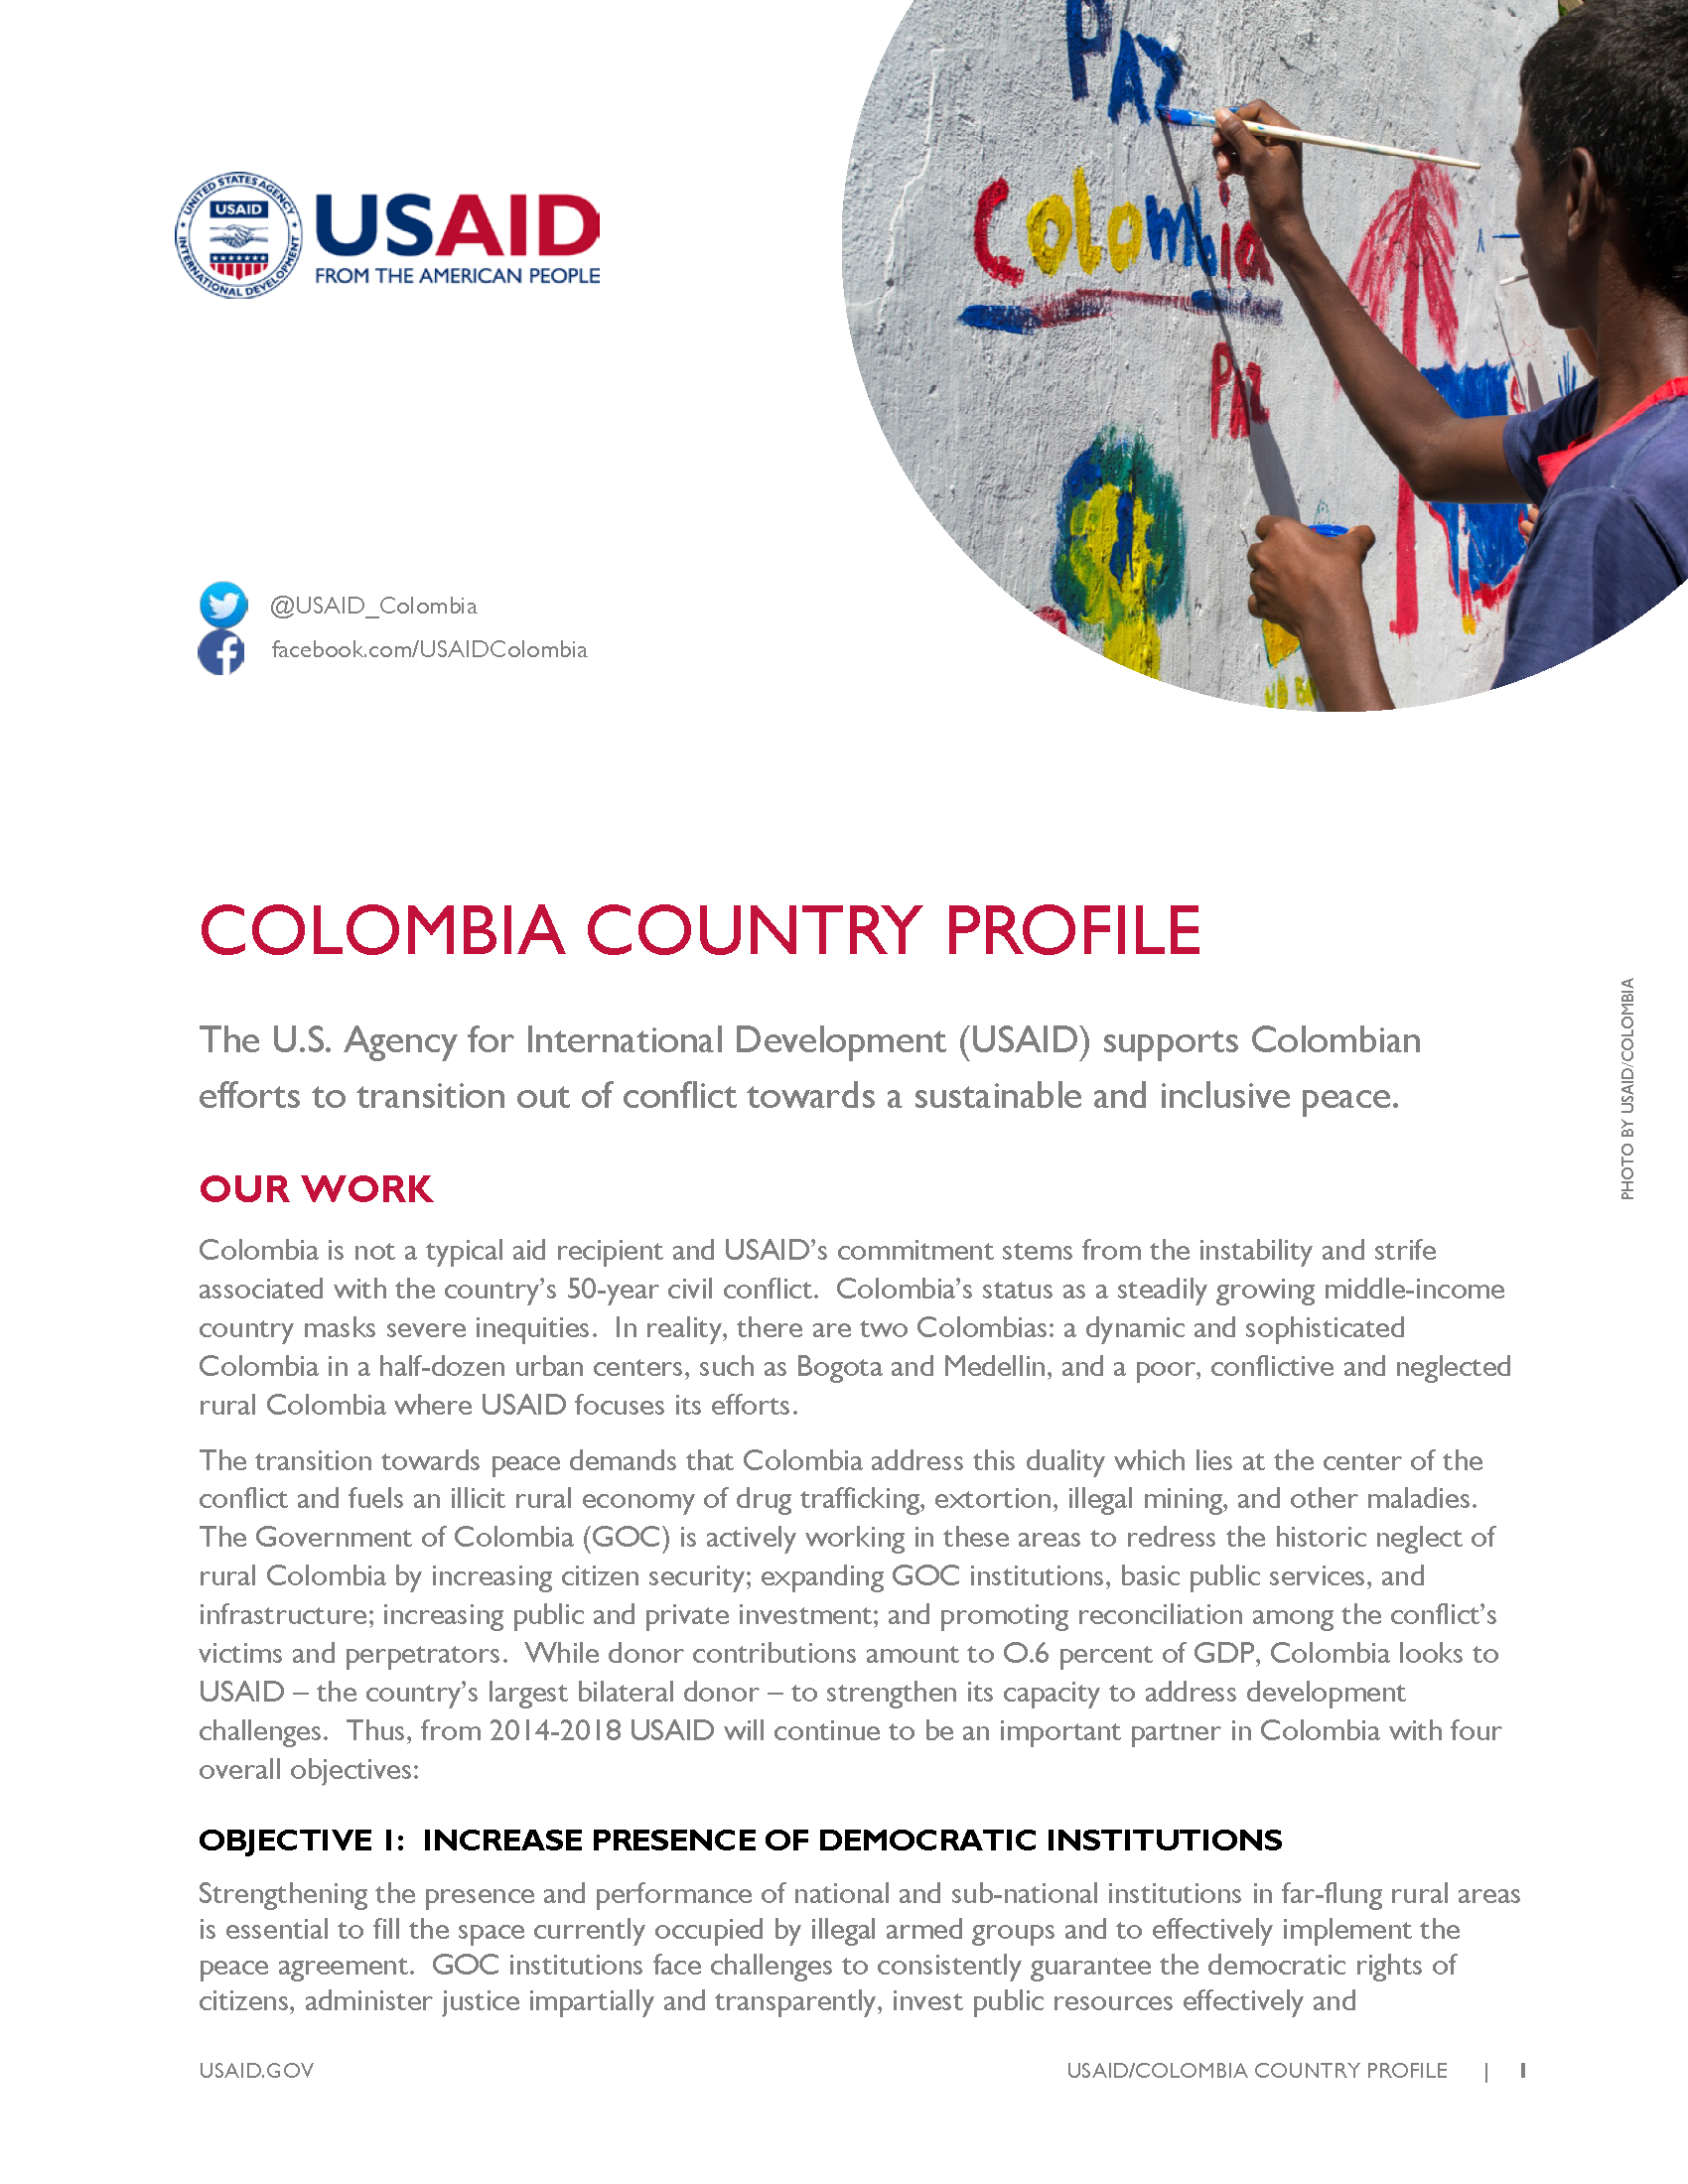 USAID/Colombia Program Overview